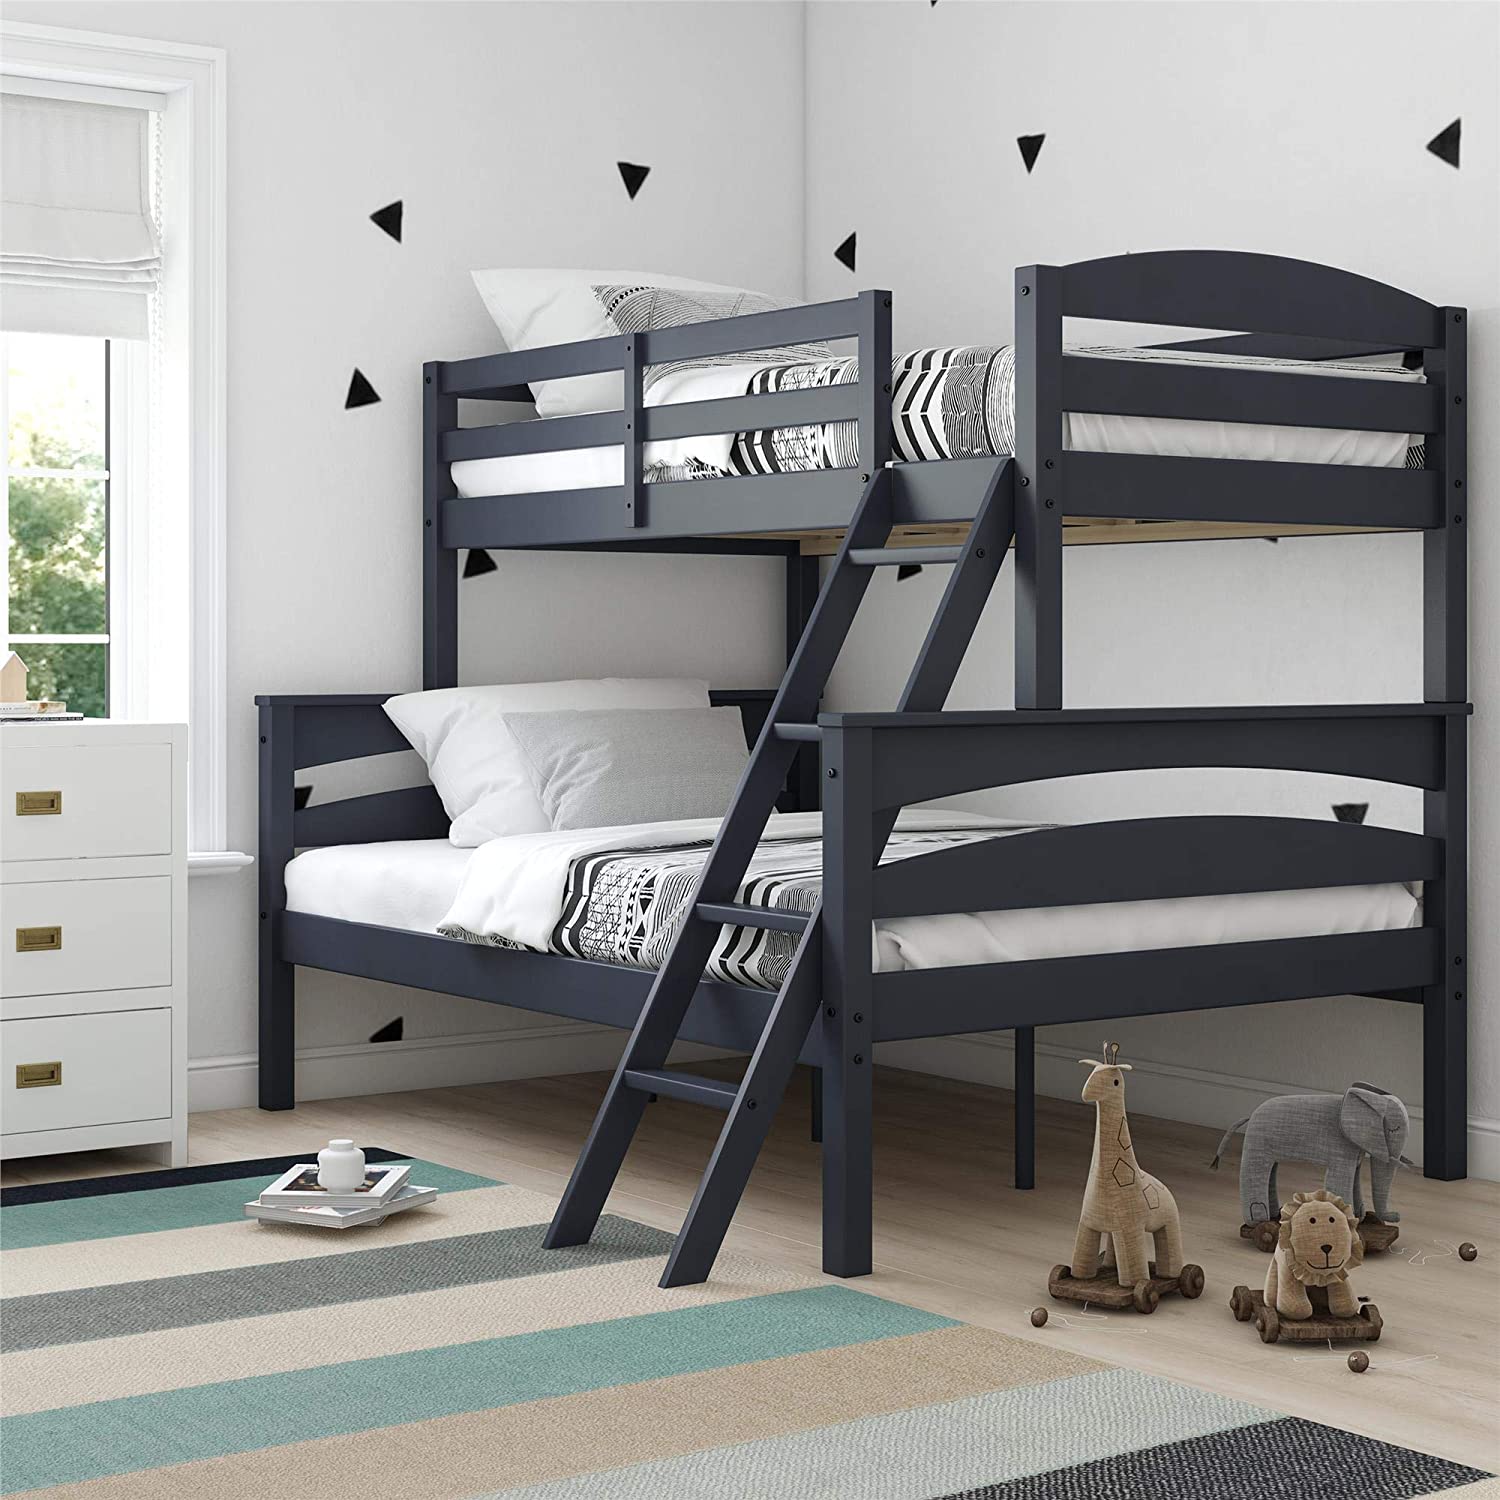 Dorel Living Brady Solid Wood Bunk Beds with Ladder and Guard Rail, Twin Over Full